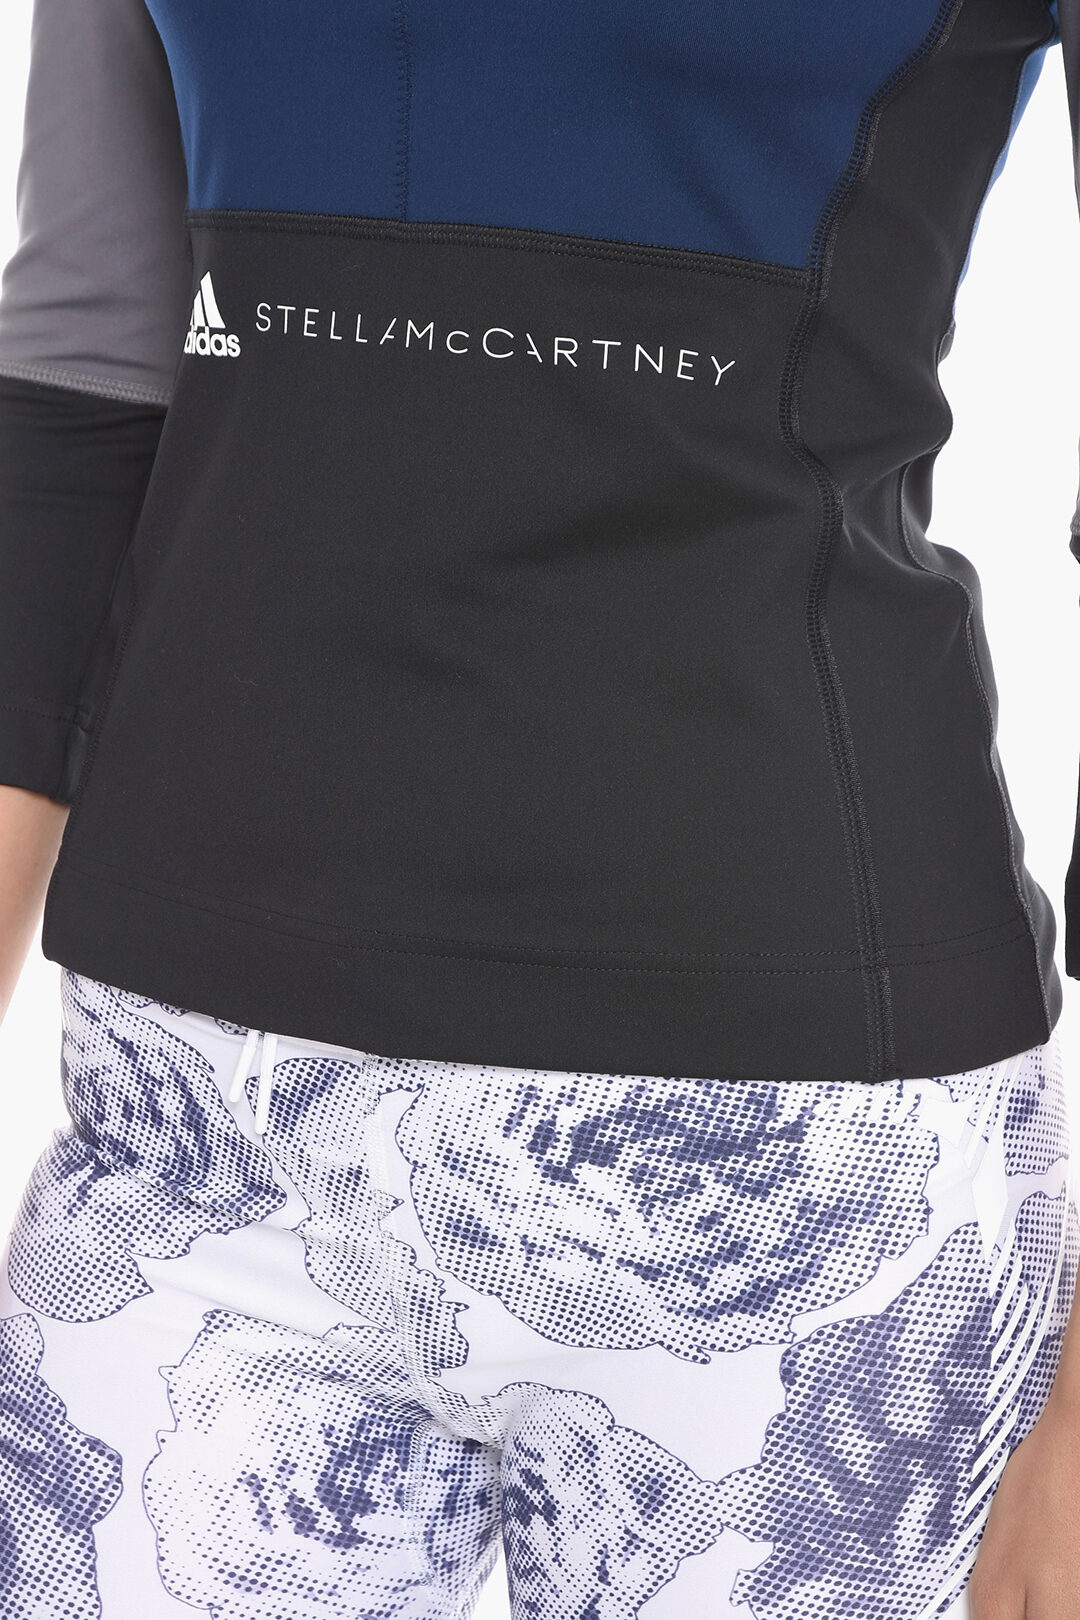 Stella McCartney PARLEY Long-sleeved Fitness with Logo Print - Outlet